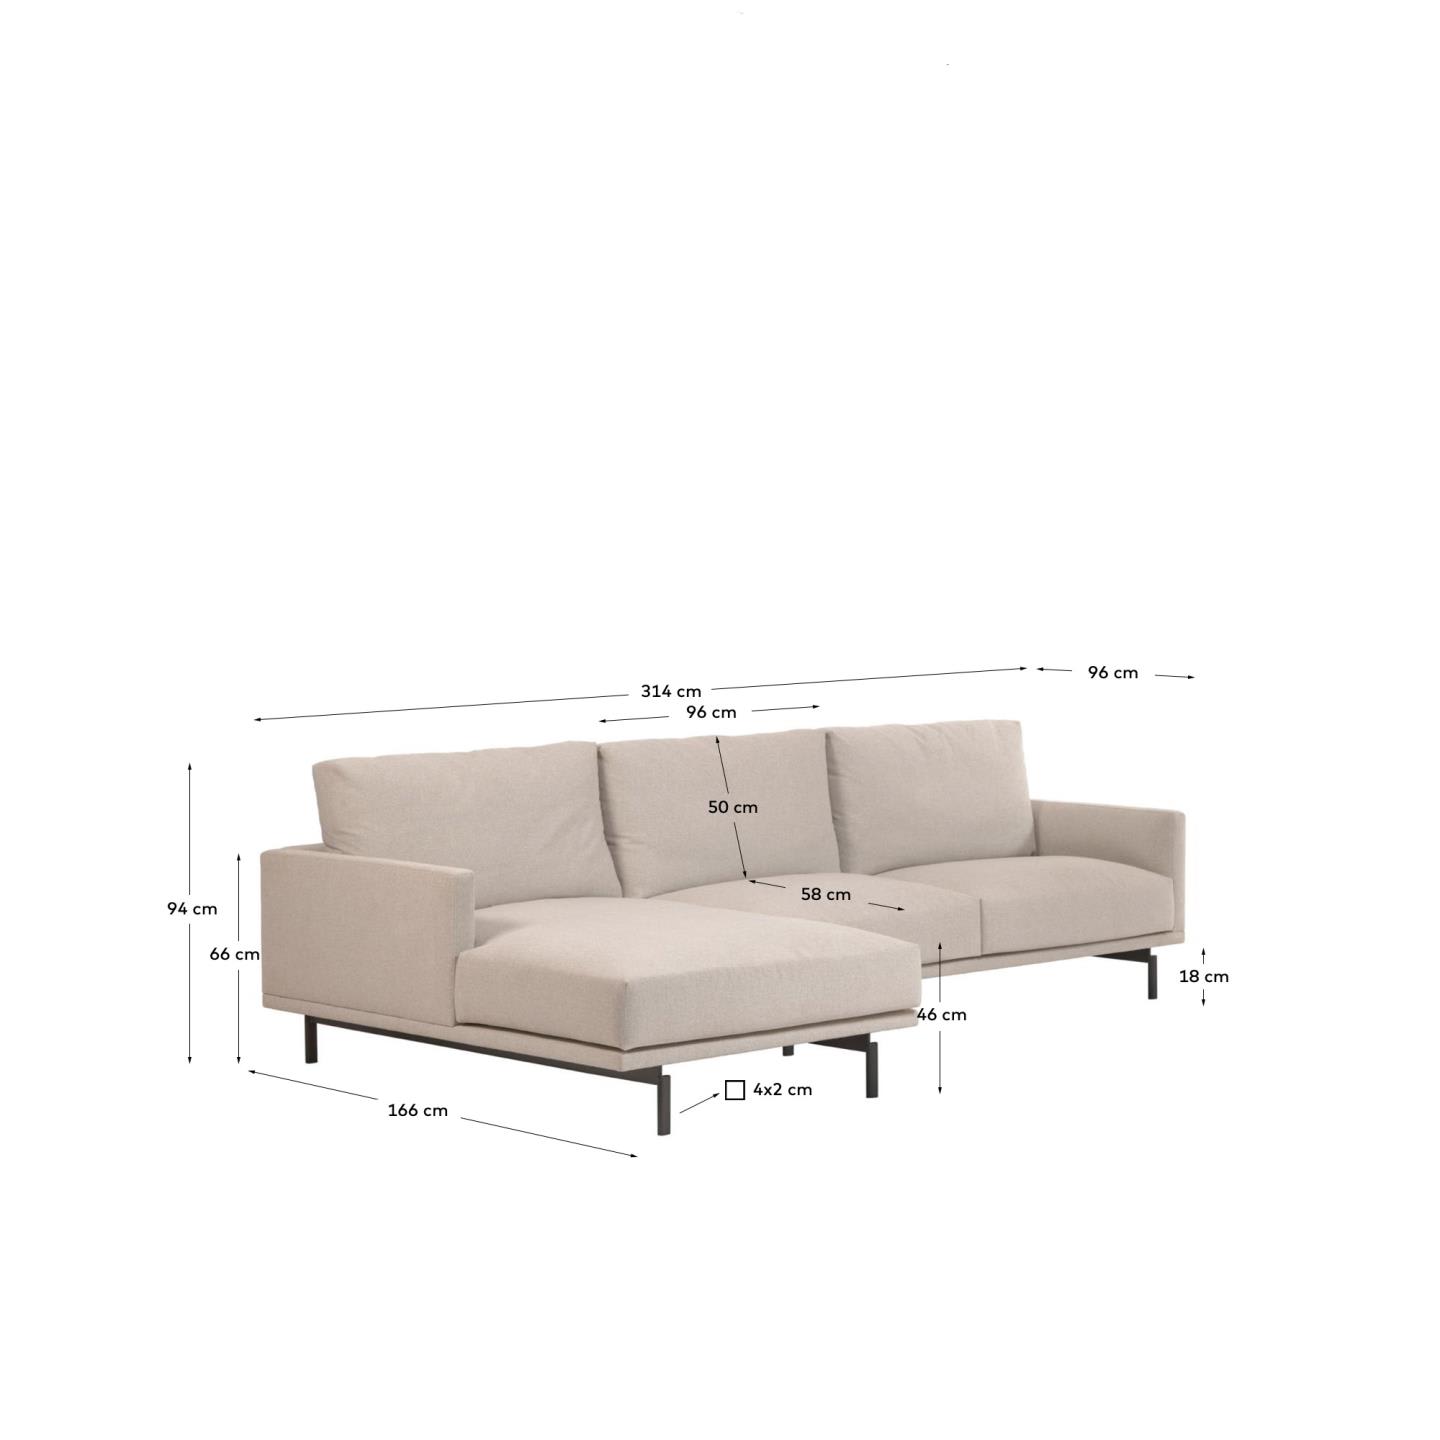 Galene 4 seater sofa with left-hand chaise longue in beige, 314 cm - sizes